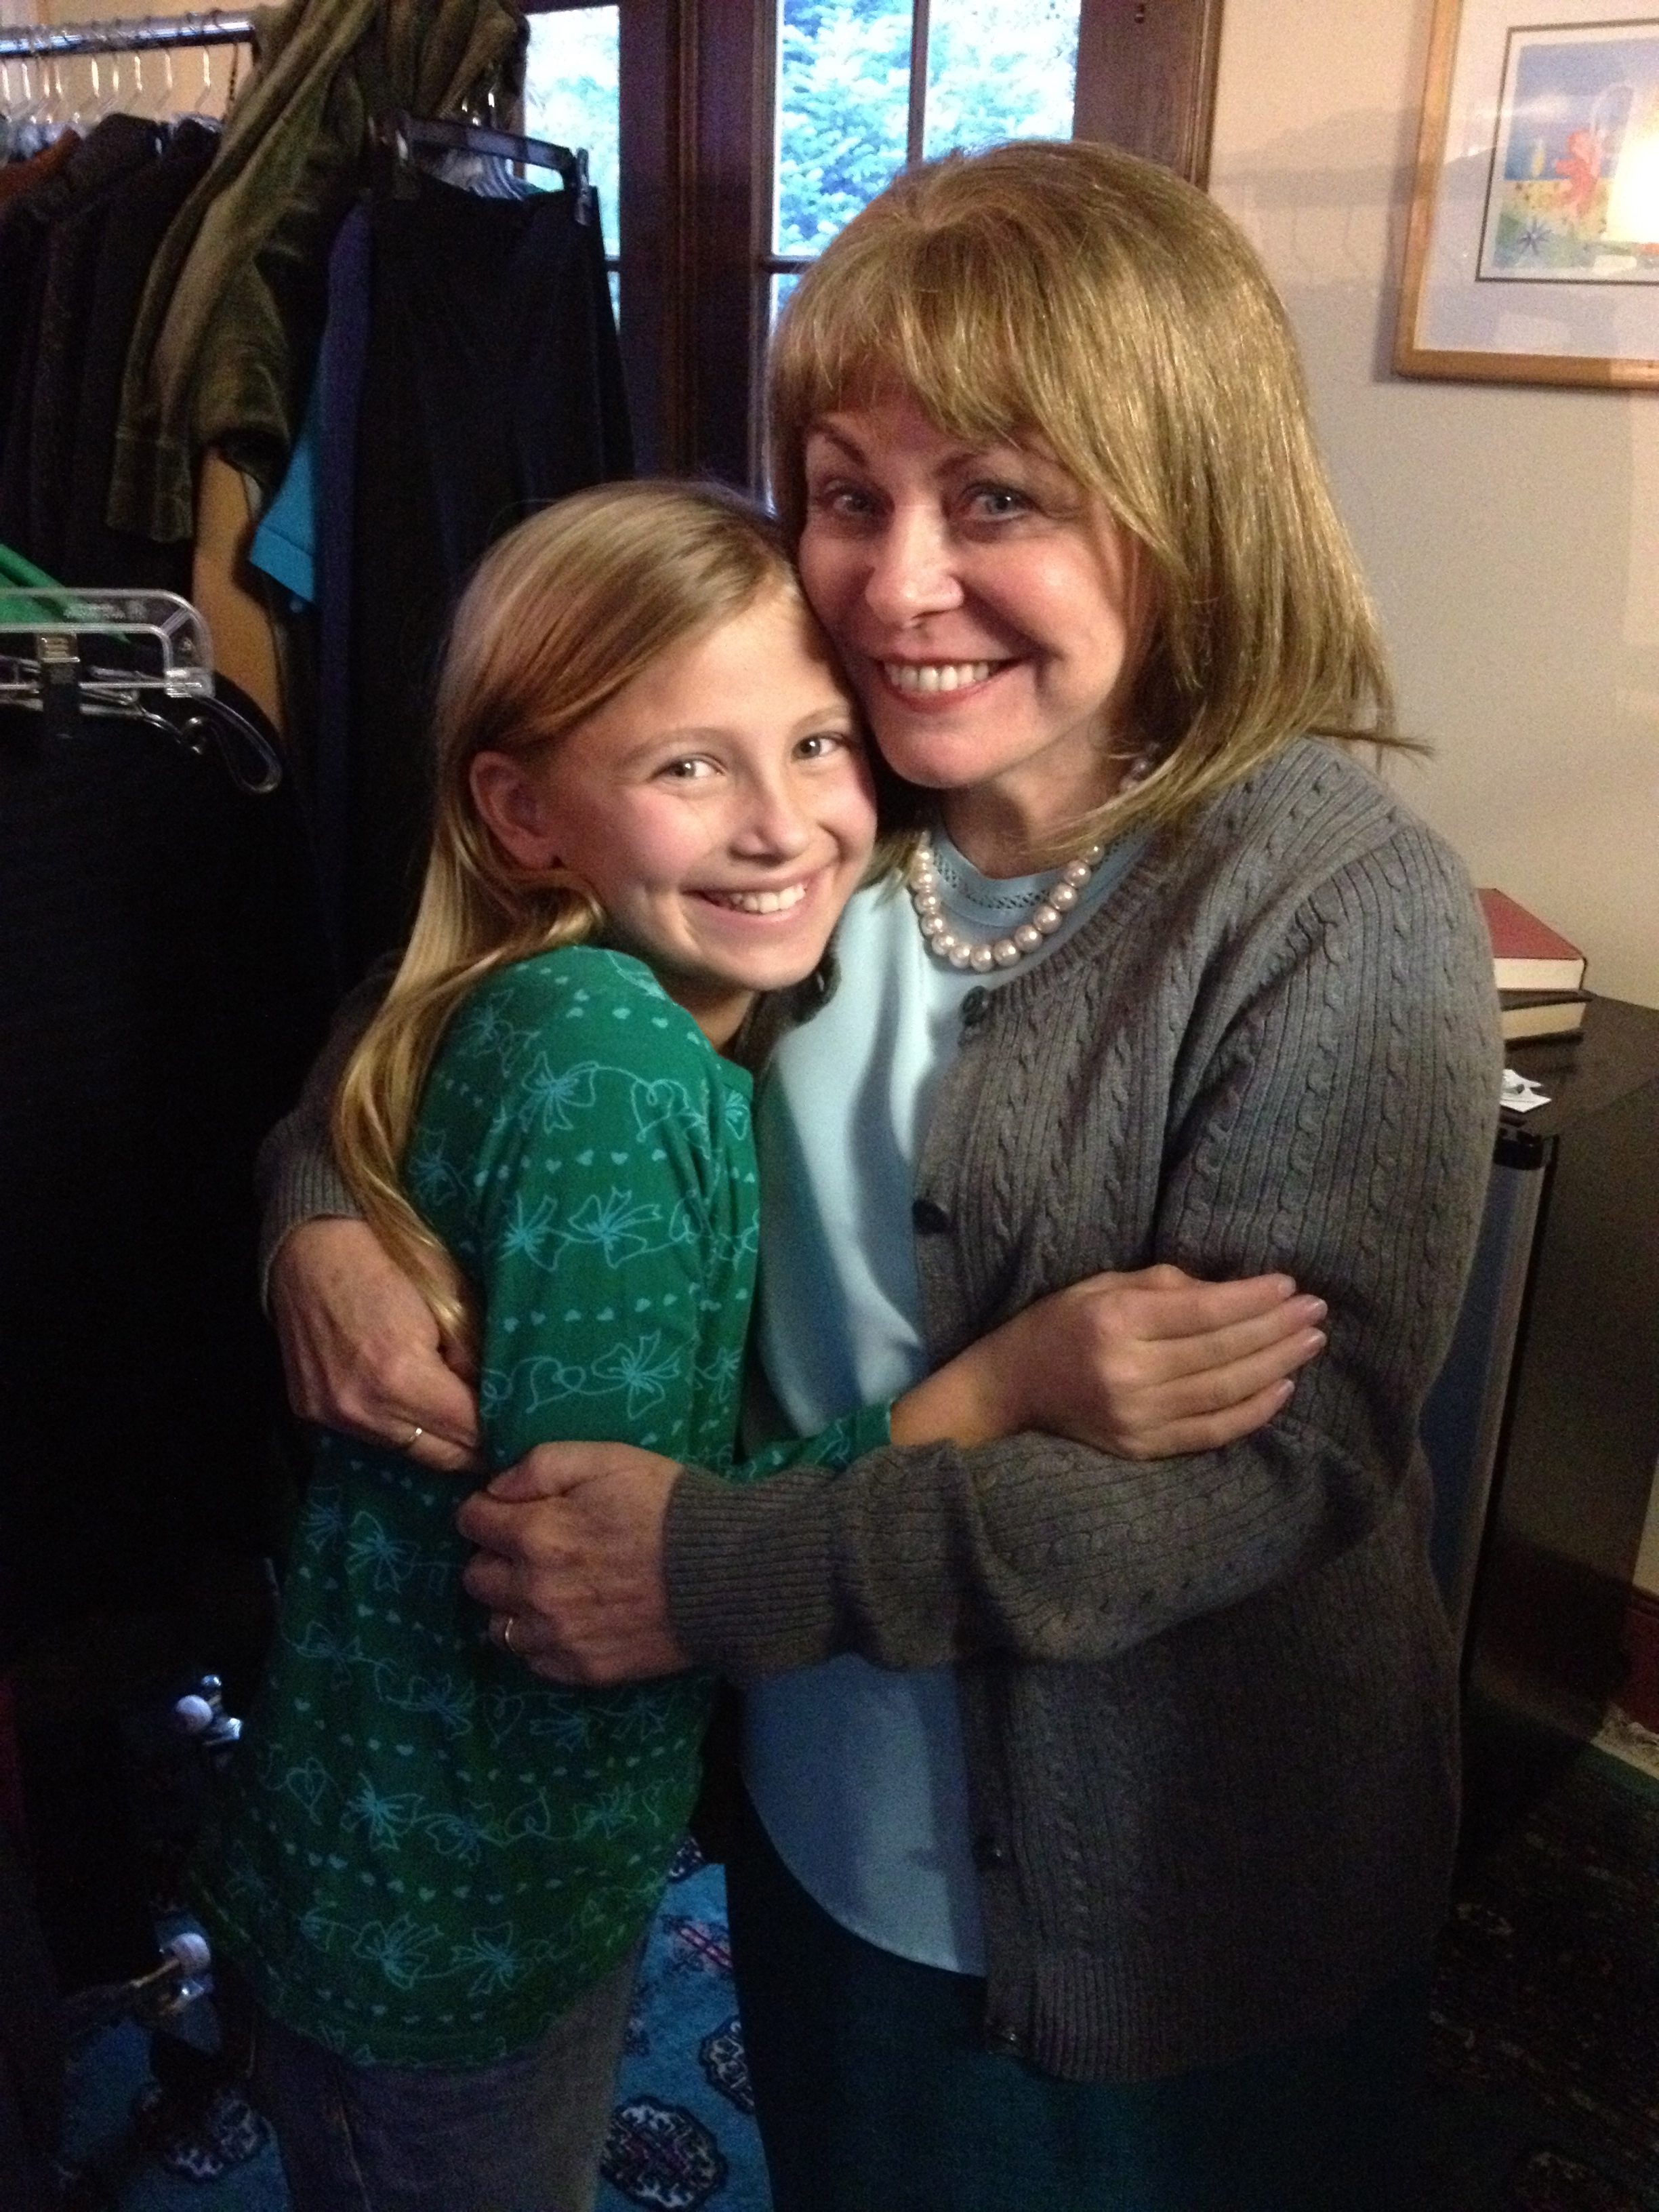 Maggie on set of Haunt directed by Mac Carter with Jacki Weaver who played her mom in the film.